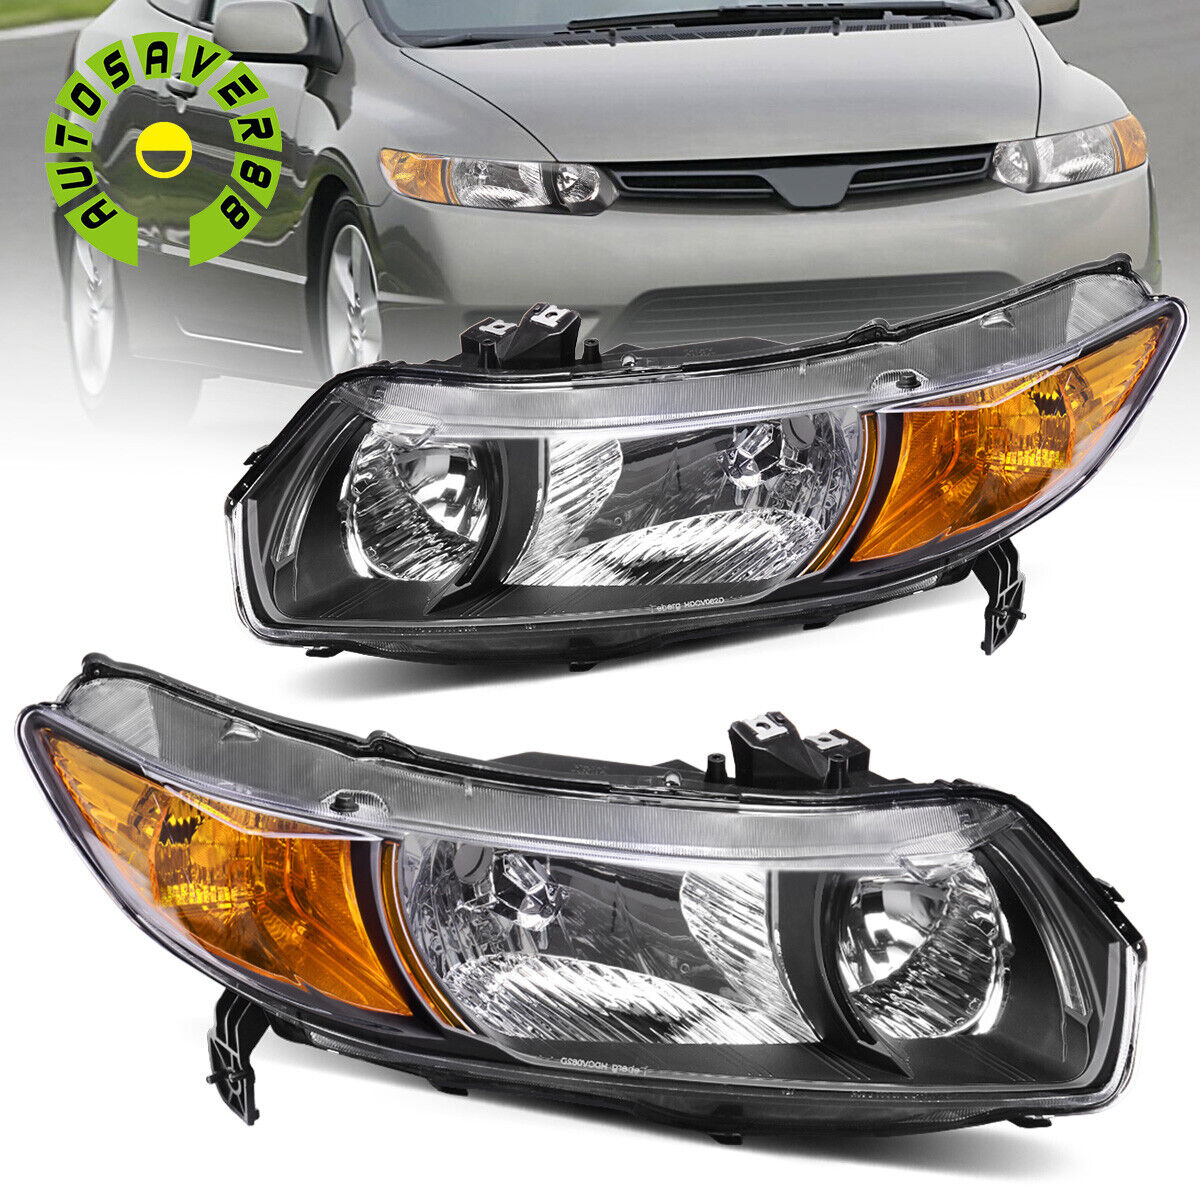 Headlights Assembly For 2006-2011 Honda Civic Coupe 2Dr Black Housing Lamps Pair